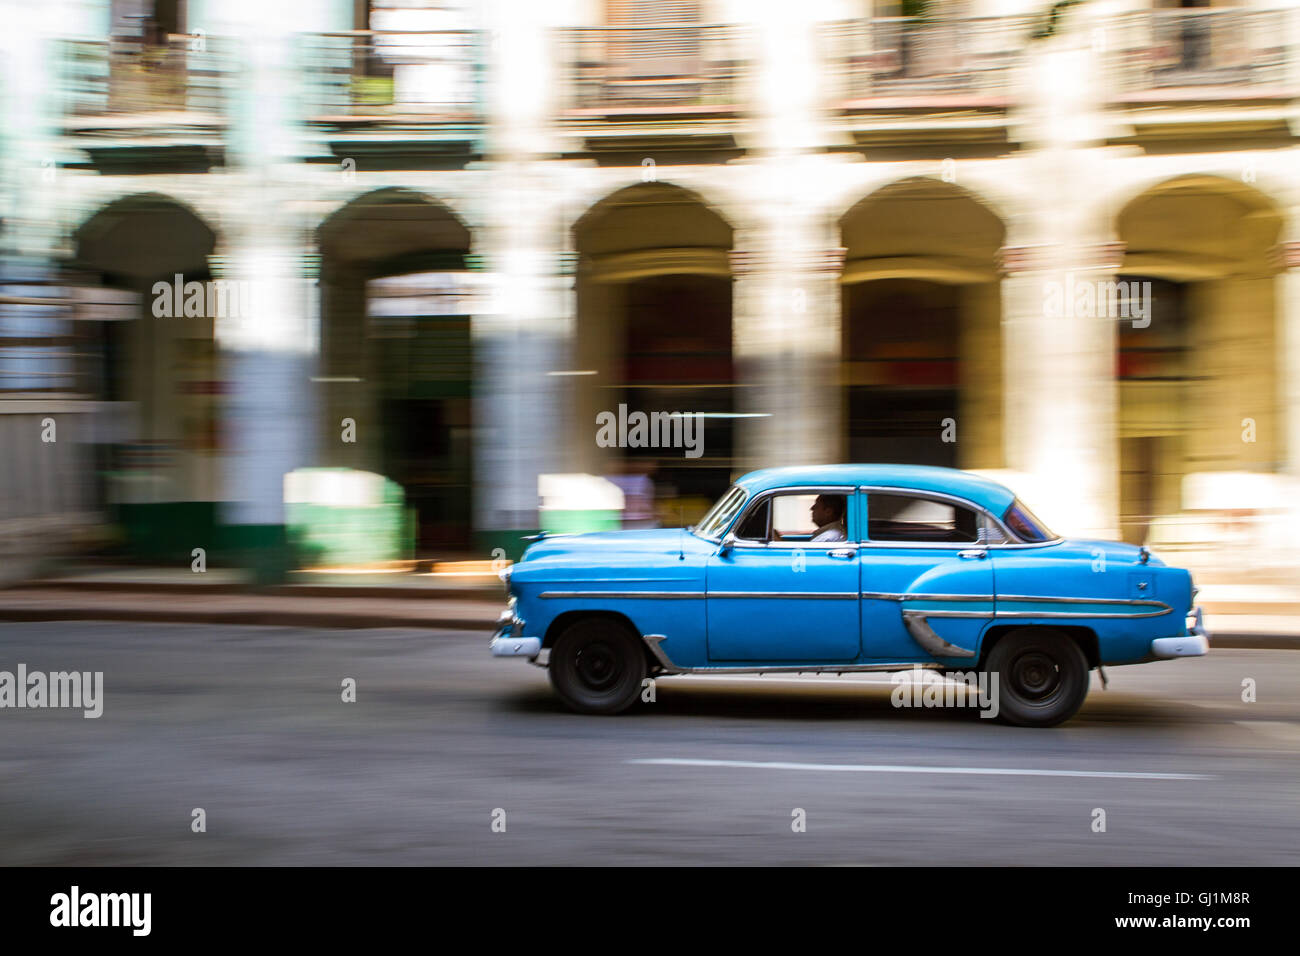 Panning shot of classic, vintage car on sunny day in colonial street, Havana, Cuba, 2013 Stock Photo